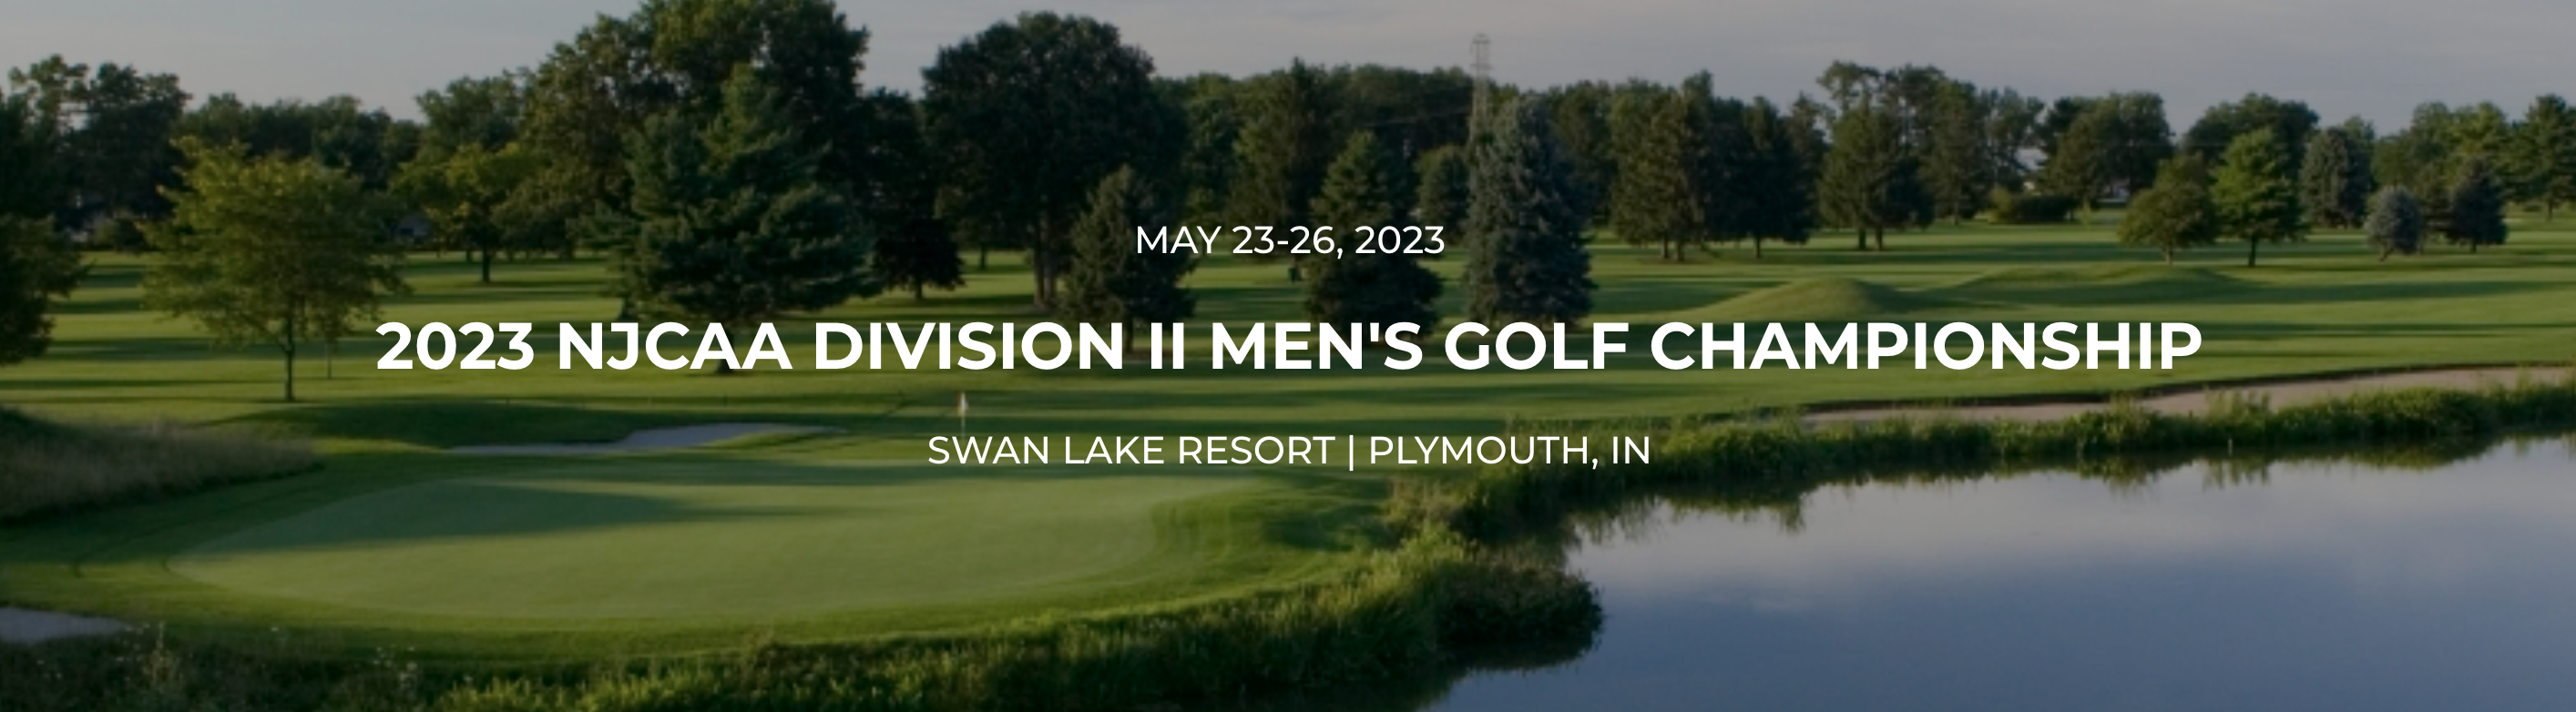 Eagles Compete in 2023 NJCAA Division II Men's Golf National Championship